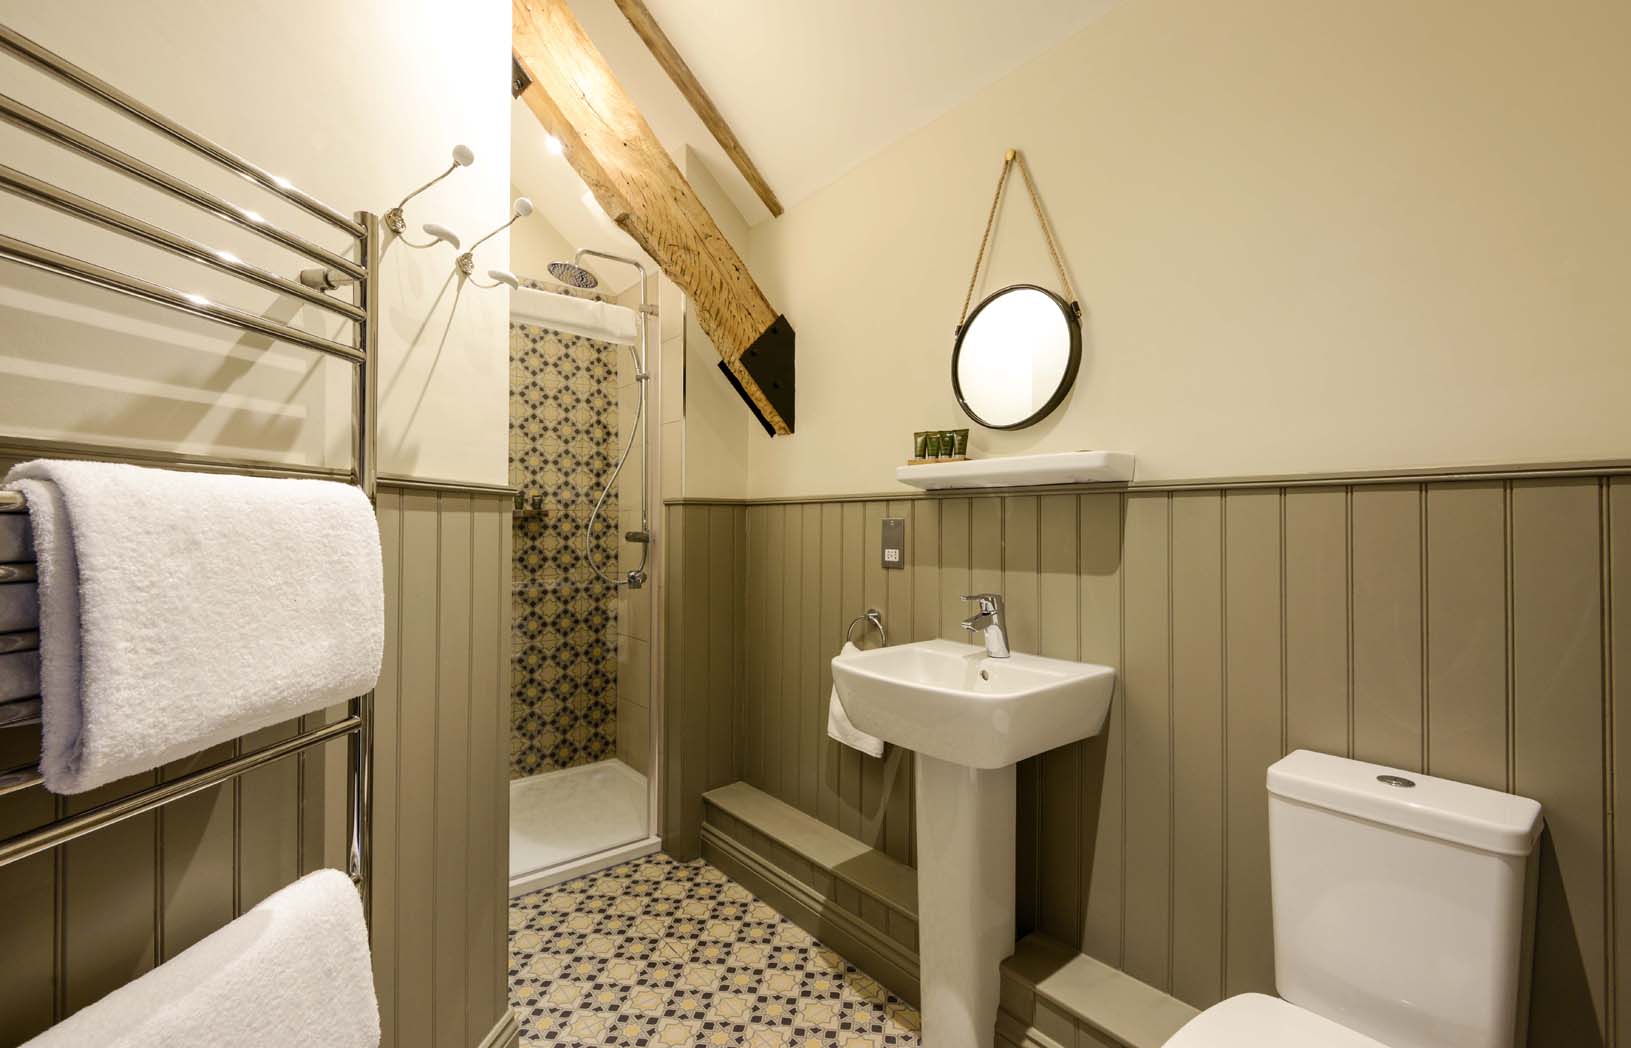 Chewton Head - Bathroom with decorative wooden panels, geometric tiles, walk in shower and heated towel rack